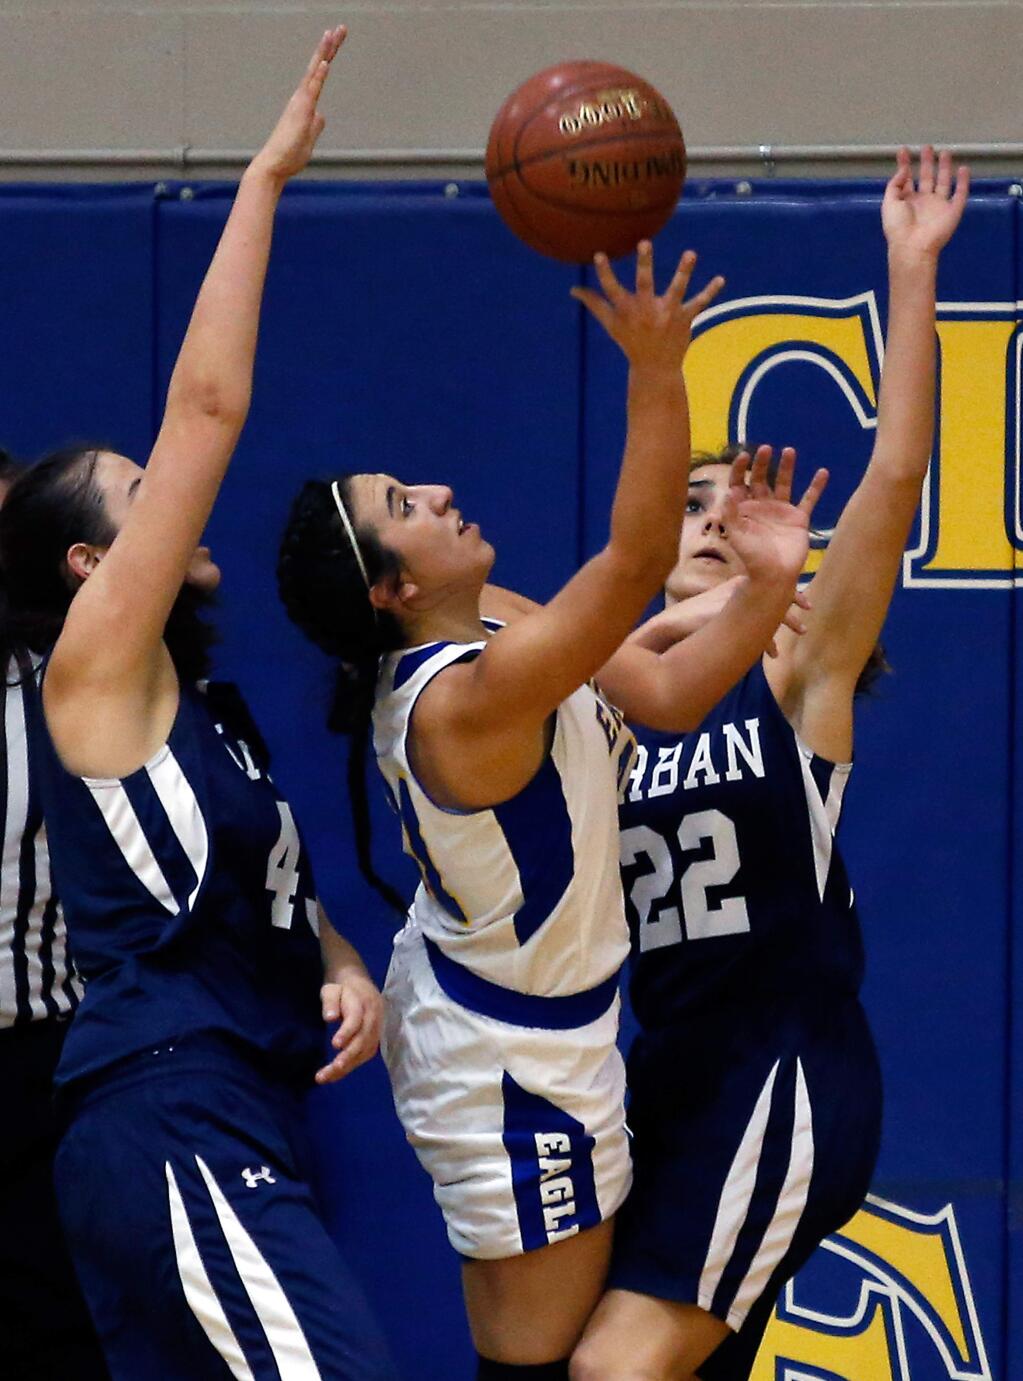 Cloverdale's Angel Bernardi (21), center, shoots between Urban's Iona Tangri (43), left, and Claire Beckstoffer (2) and draws a foul during first half of the NCS Division 5 semifinal girls basketball game between Urban and Cloverdale high schools in Cloverdale, California, on Wednesday, March 2, 2016. (Alvin Jornada / The Press Democrat)